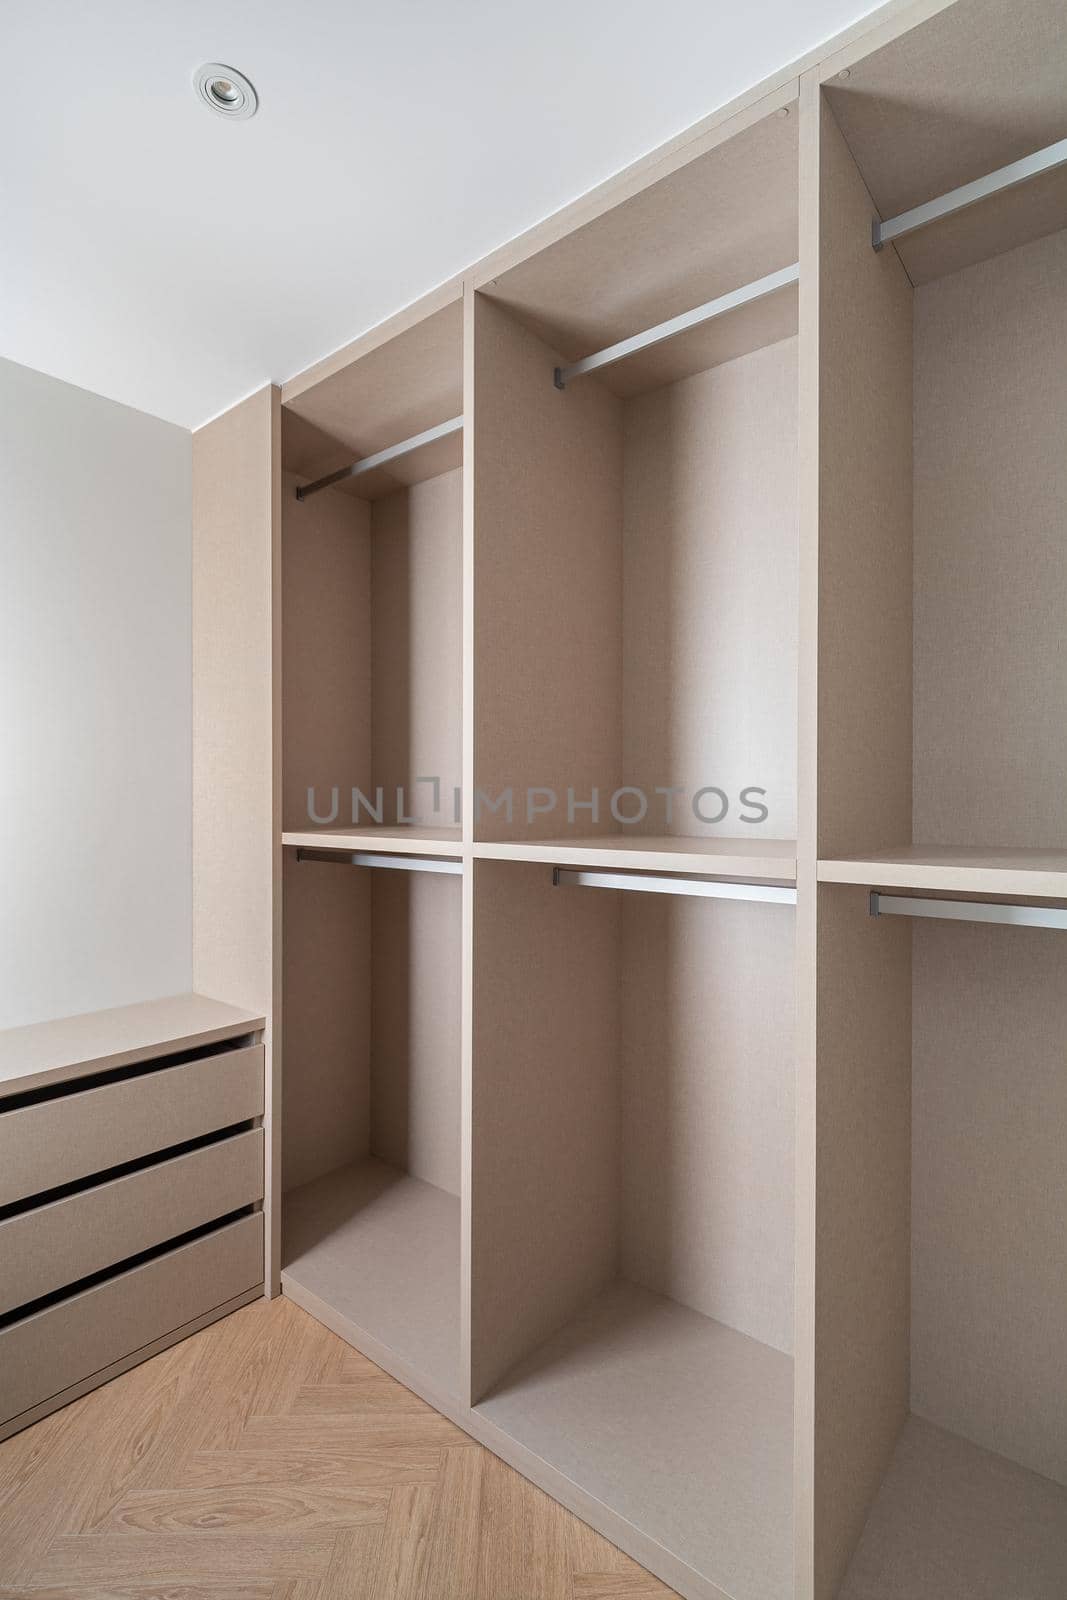 New built-in furniture in a small dressing room. Modern and empty storage room with wardrobe, drawers and plenty of space for hangers. by apavlin